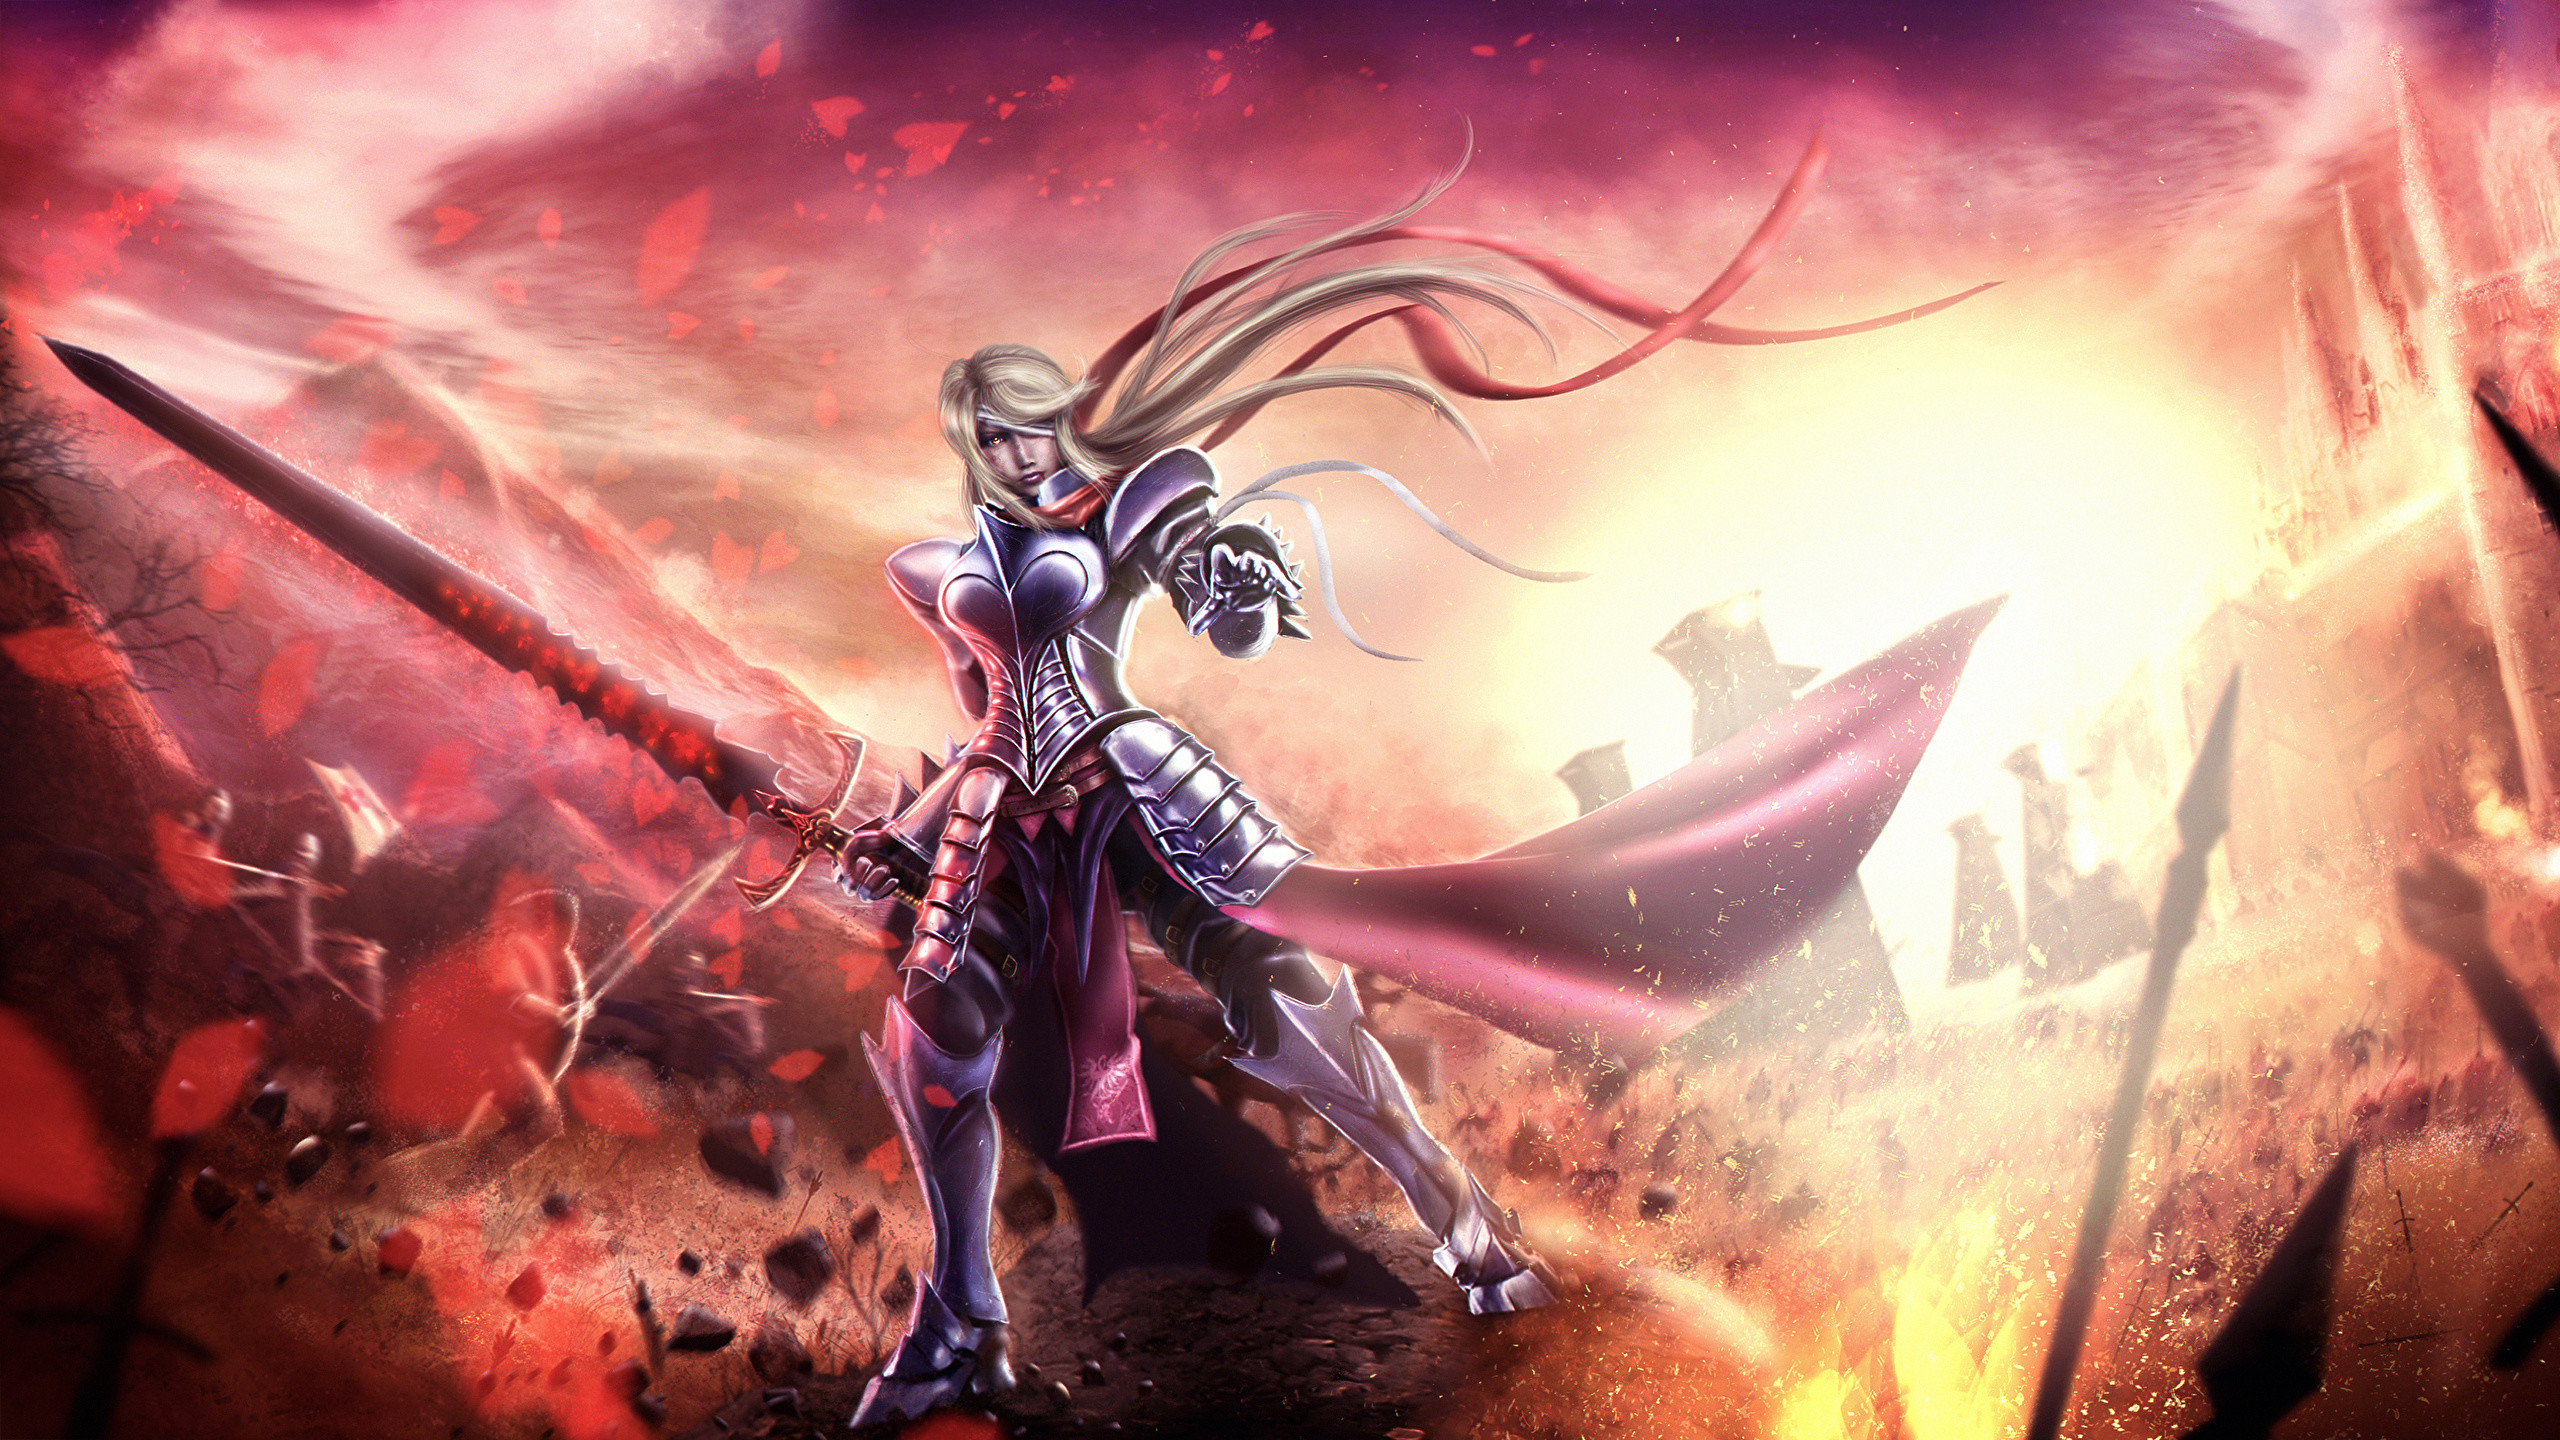 armor wallpaper,action adventure game,cg artwork,demon,fictional character,warlord